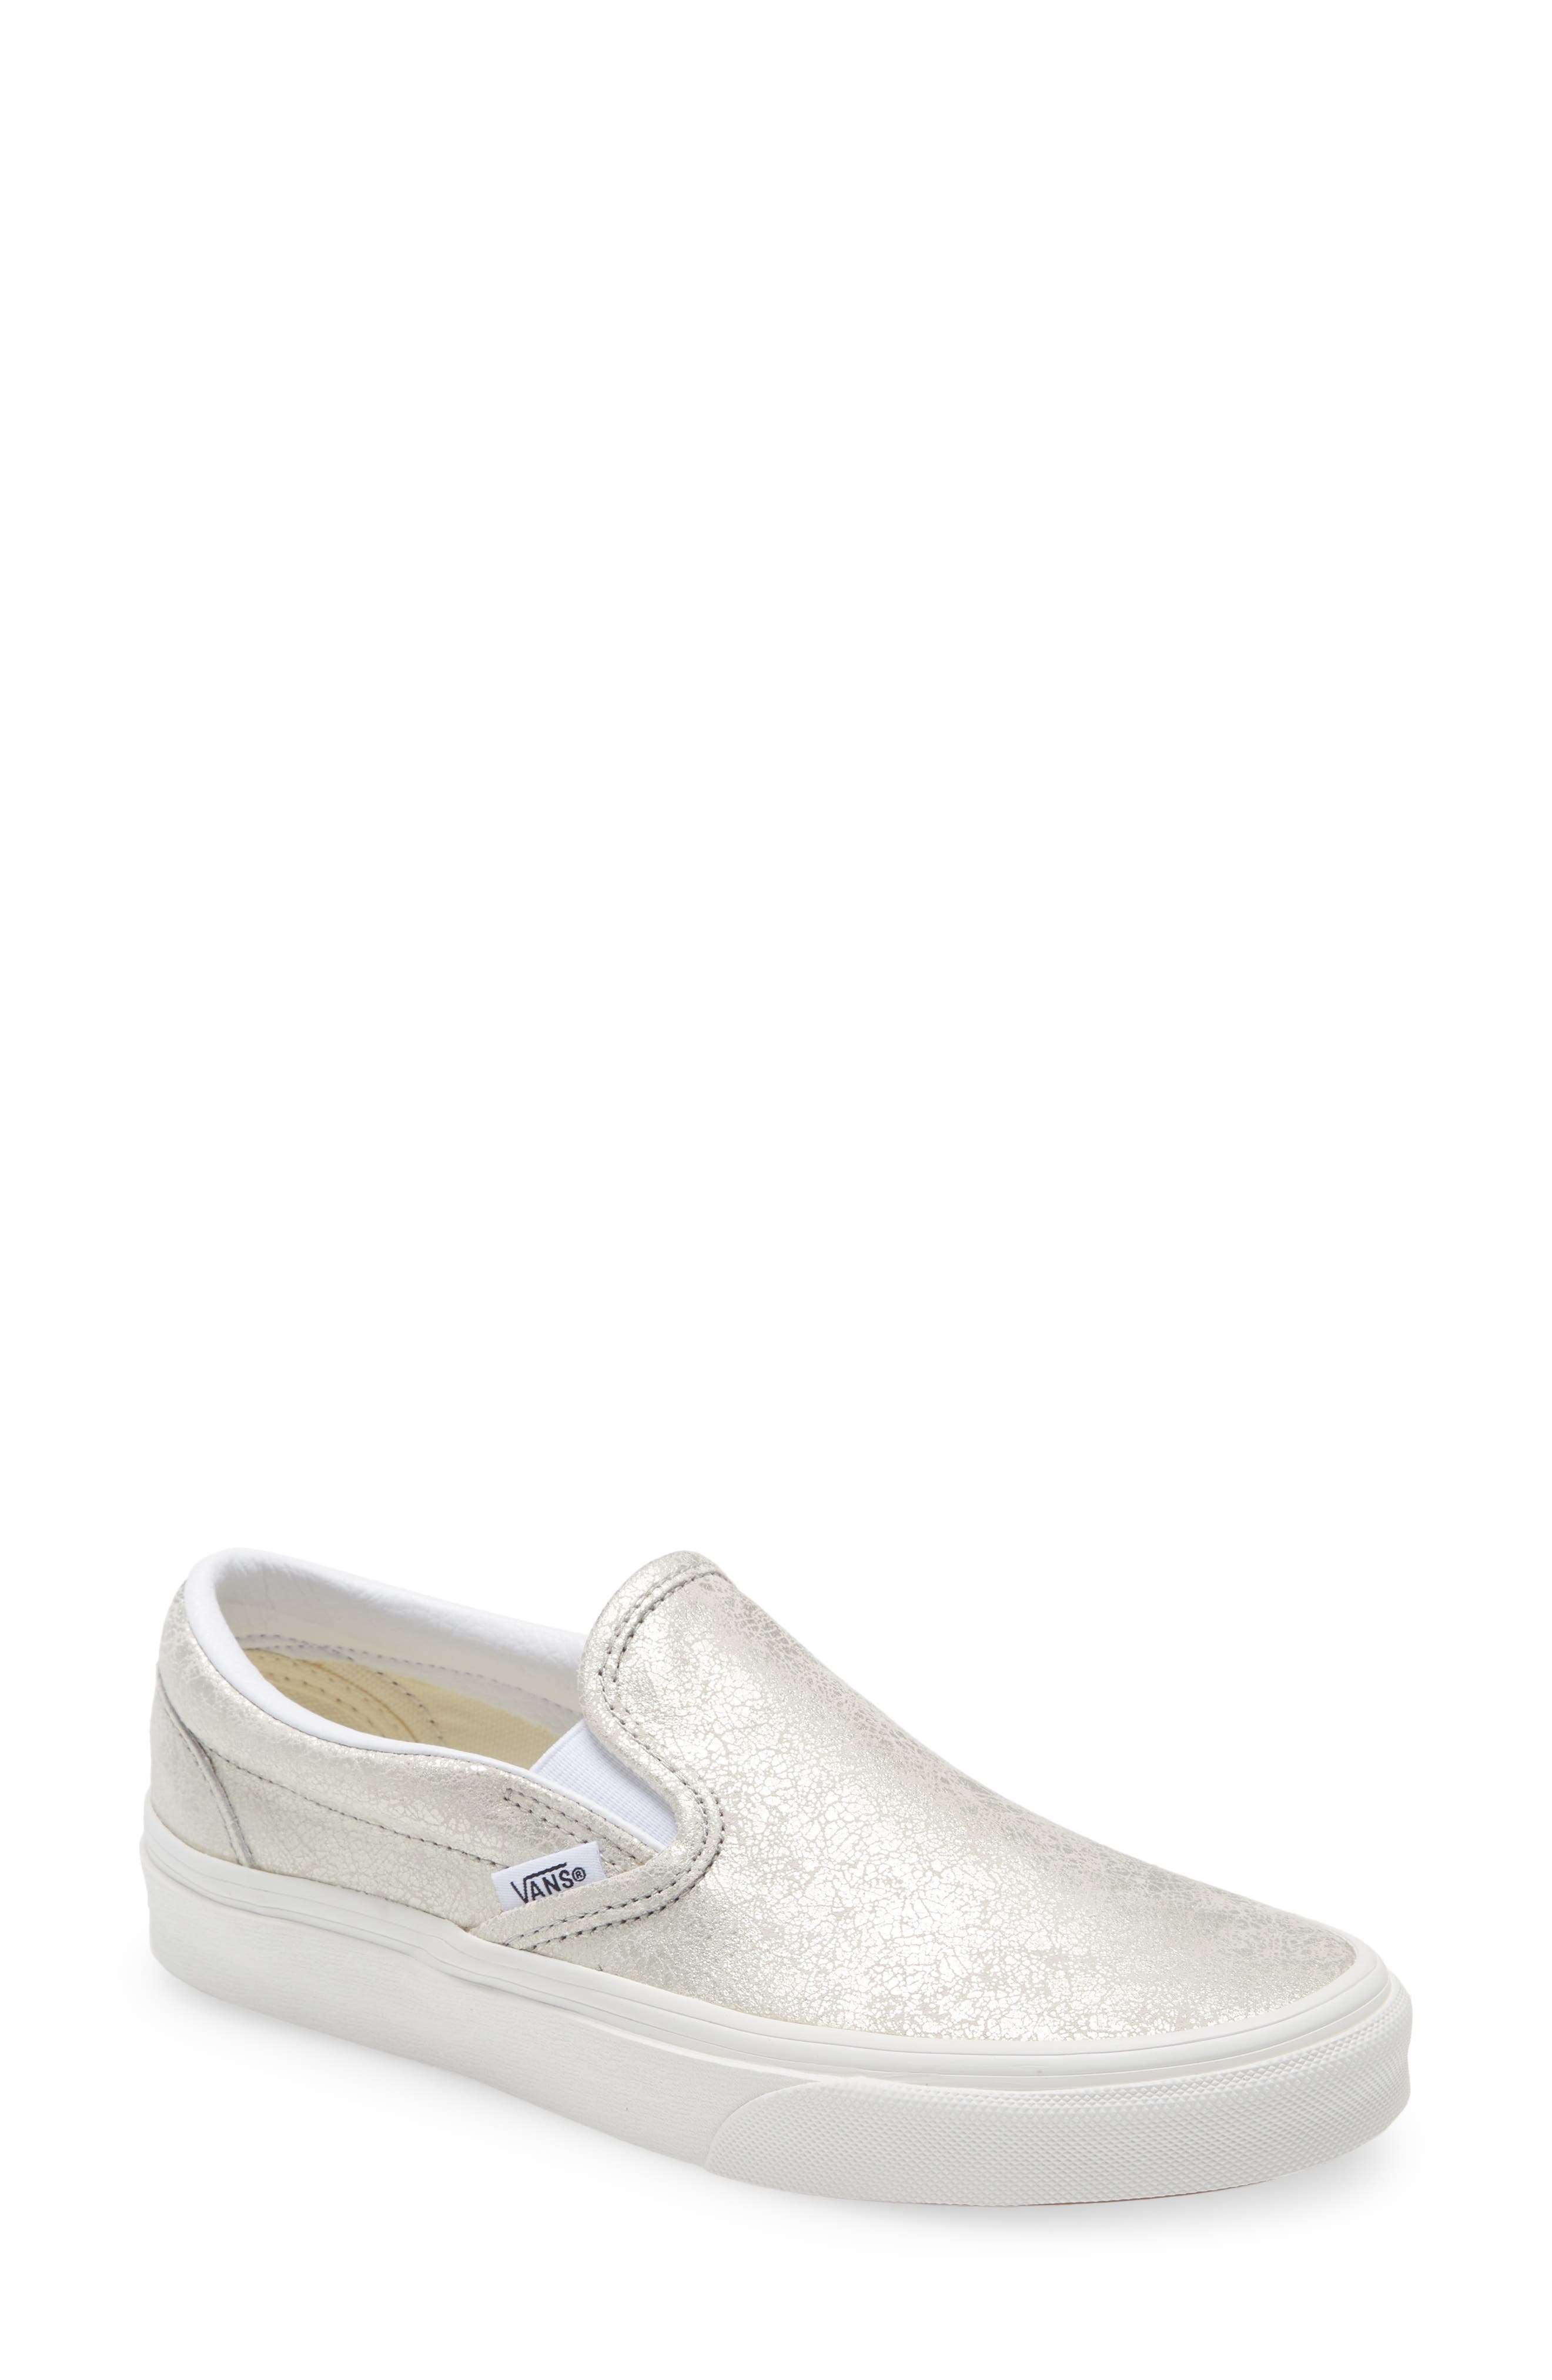 vans loafers womens